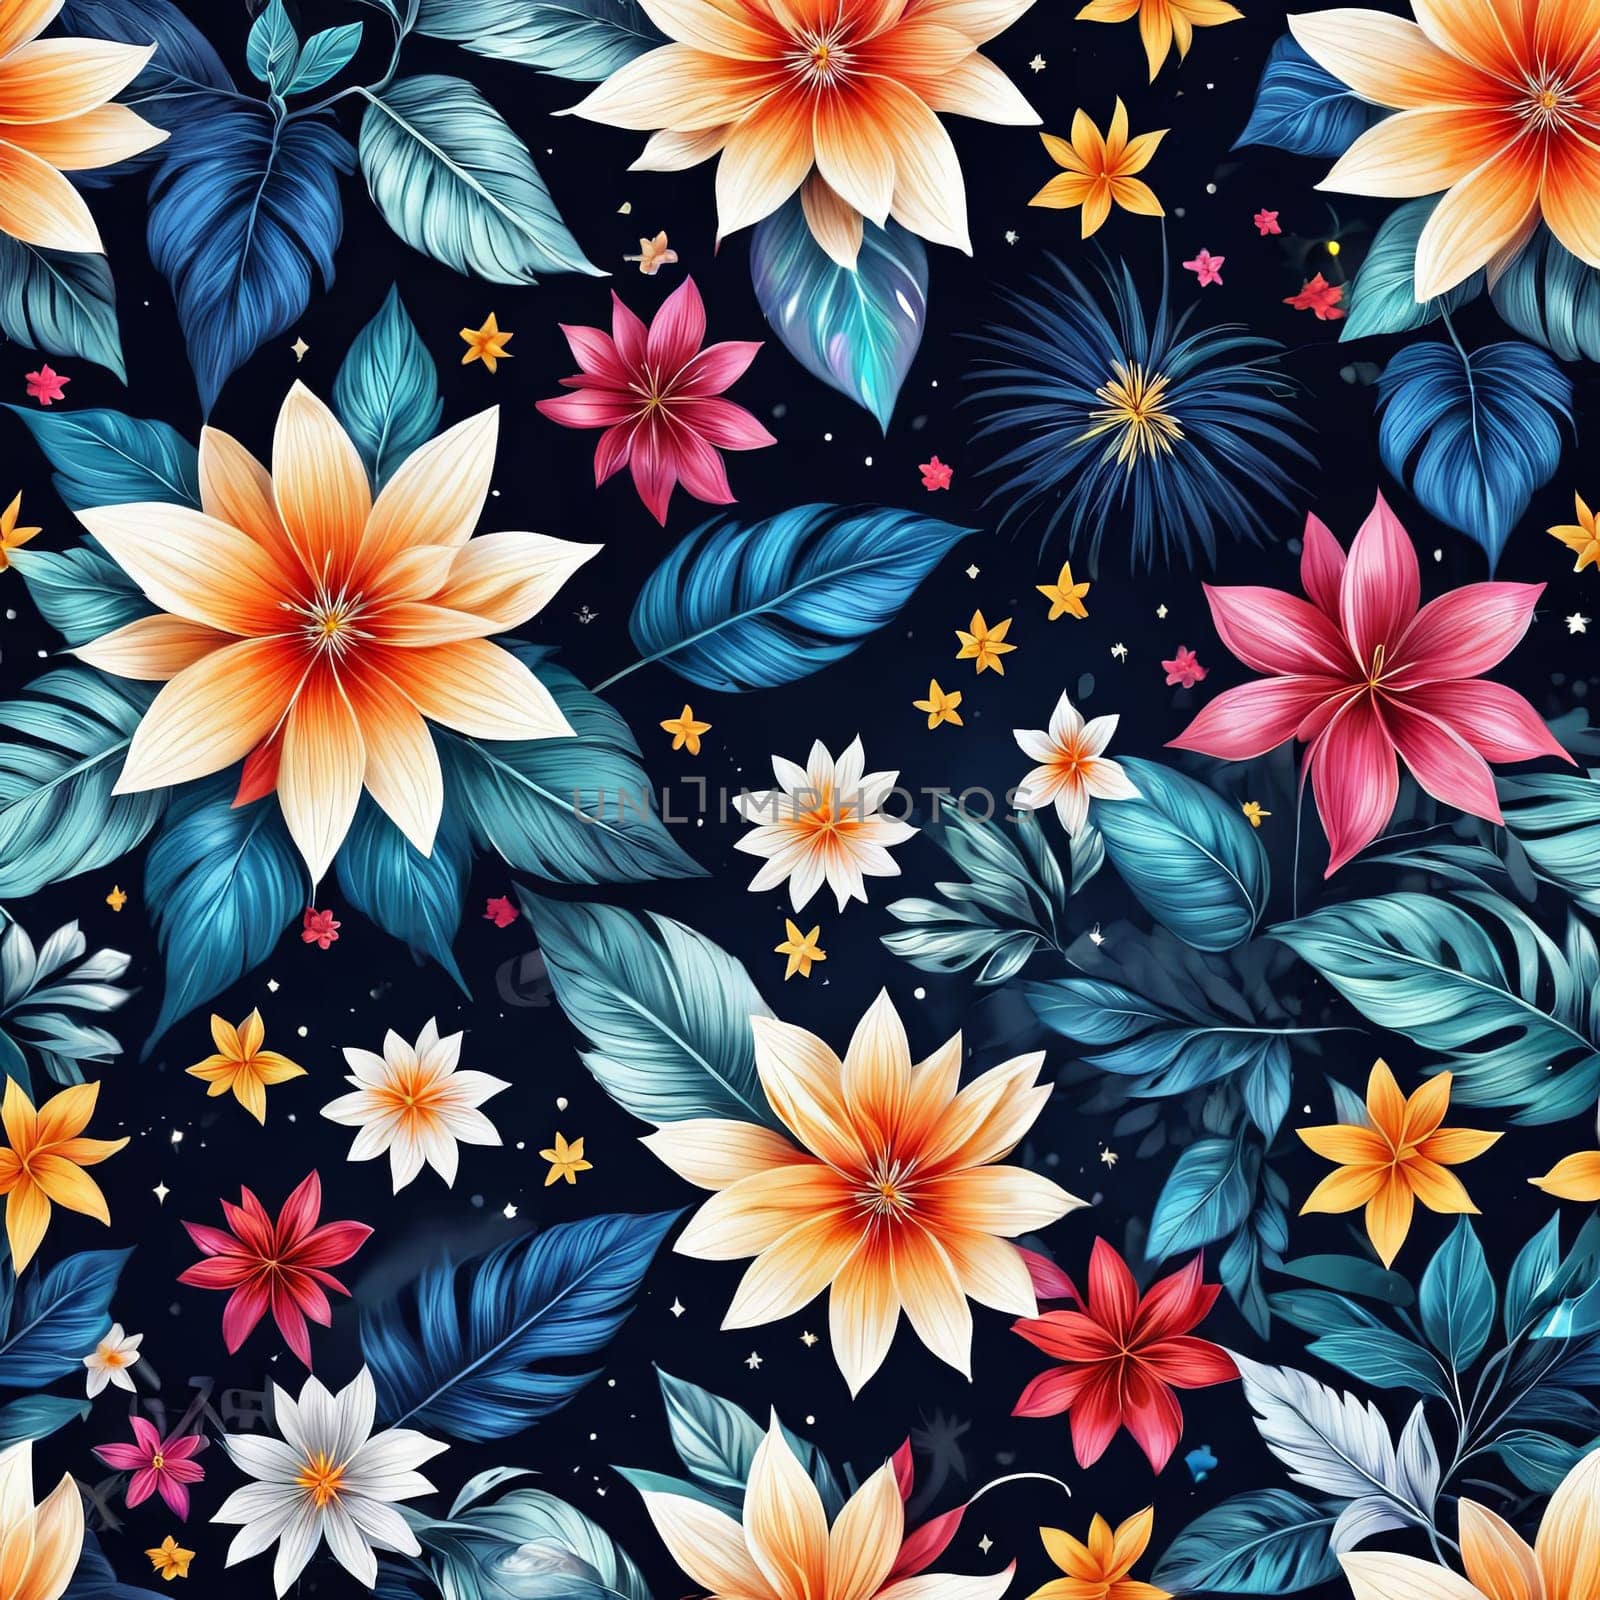 Image features striking contrast between vivid colors of flowers, dark backdrop, creating visually appealing, dramatic composition. For interior design, textiles, clothing, gift wrapping, web design. by Angelsmoon